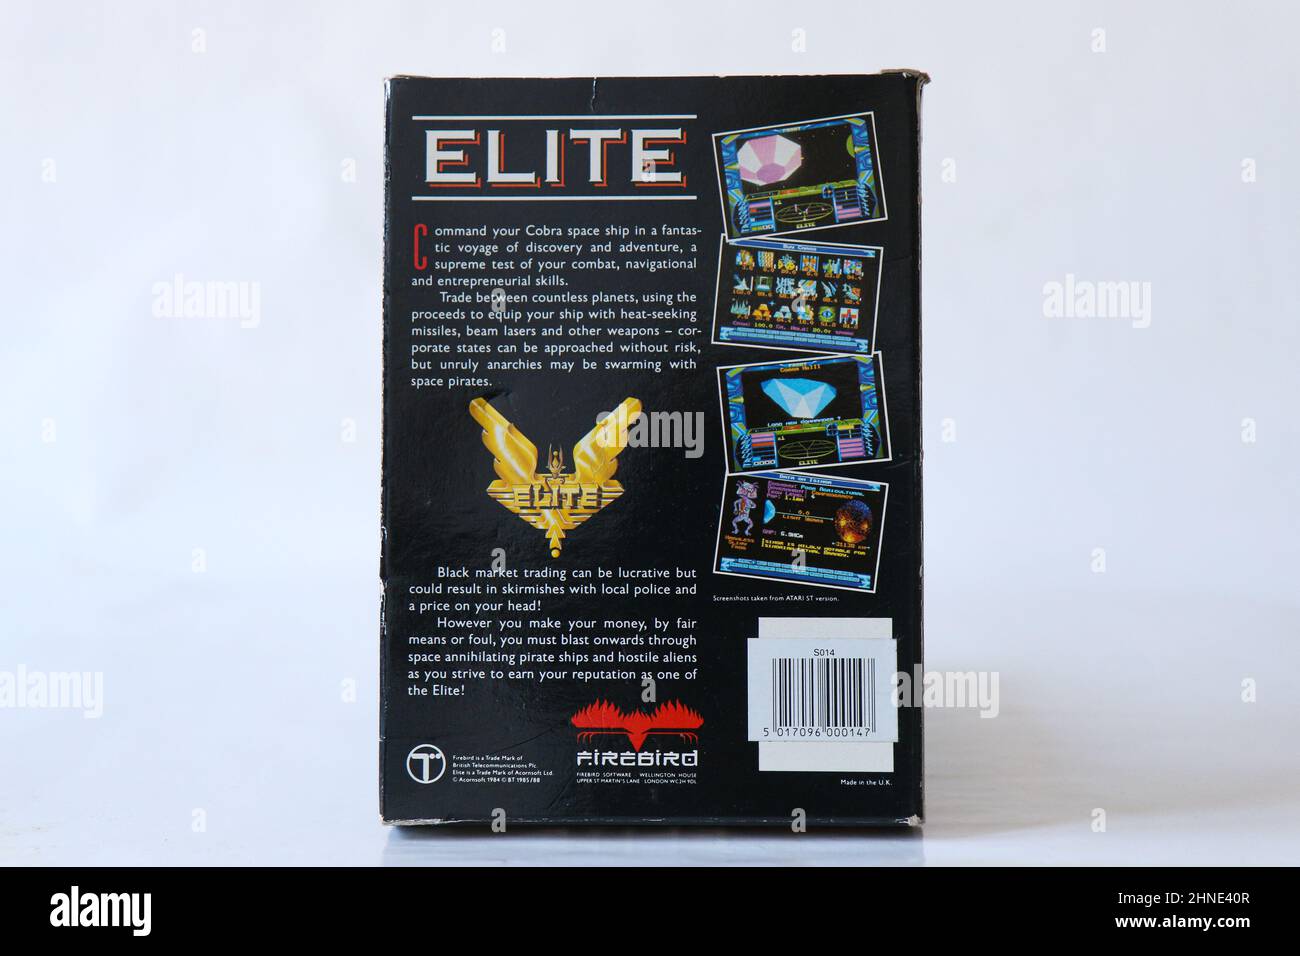 BERLIN - FEBRUARY 12, 2022: Vintage Retro Video Game ELITE for the Commodore Amiga on Floppy Disks. Firebird released this Space Simulation Game in 19 Stock Photo